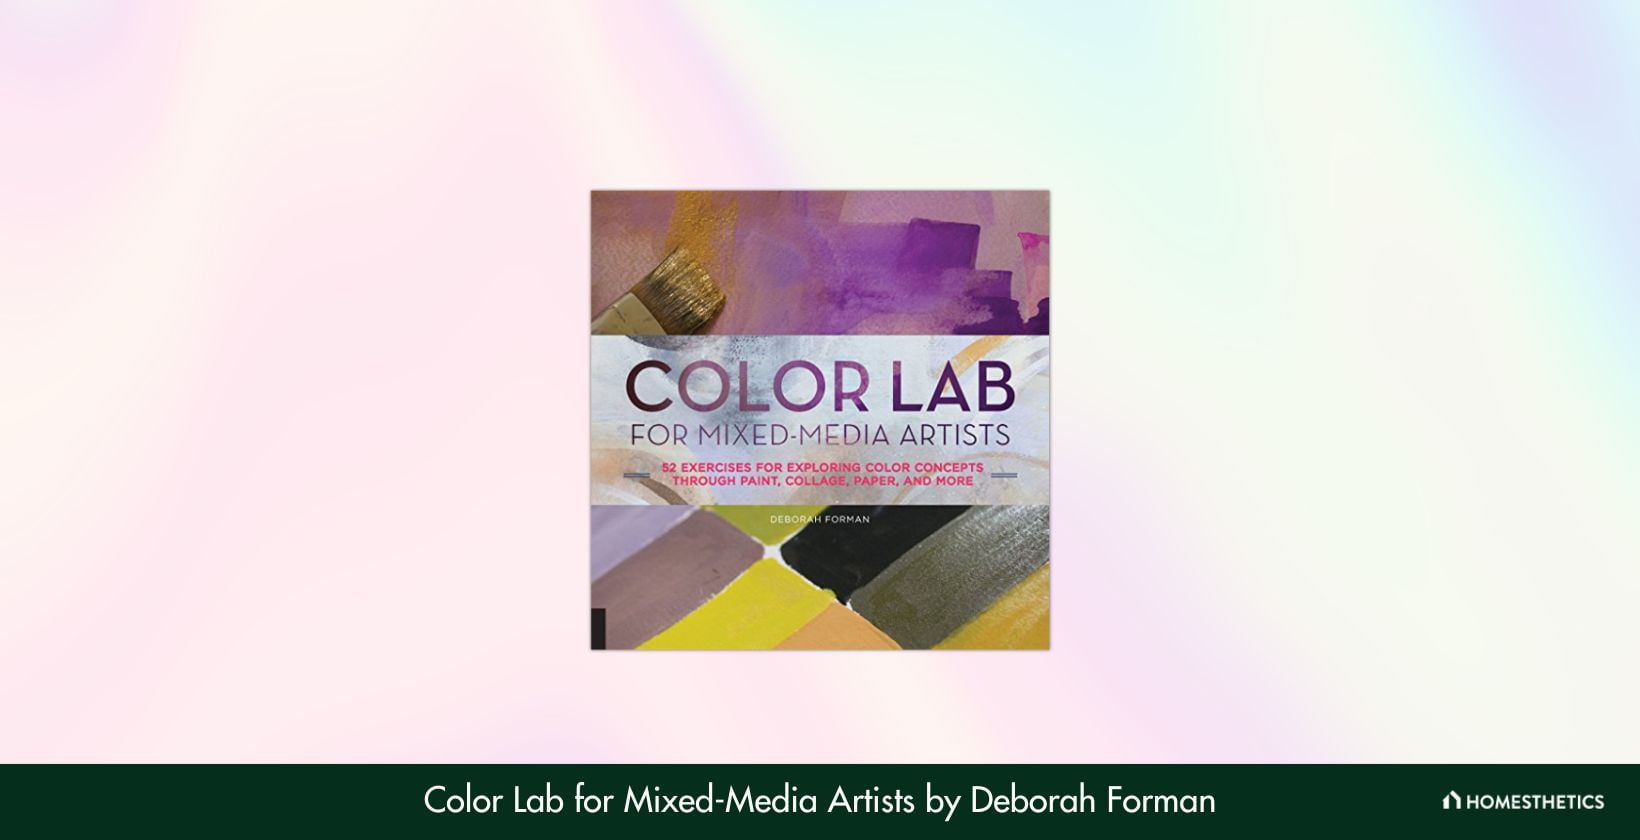 Color Lab for Mixed Media Artists by Deborah Forman